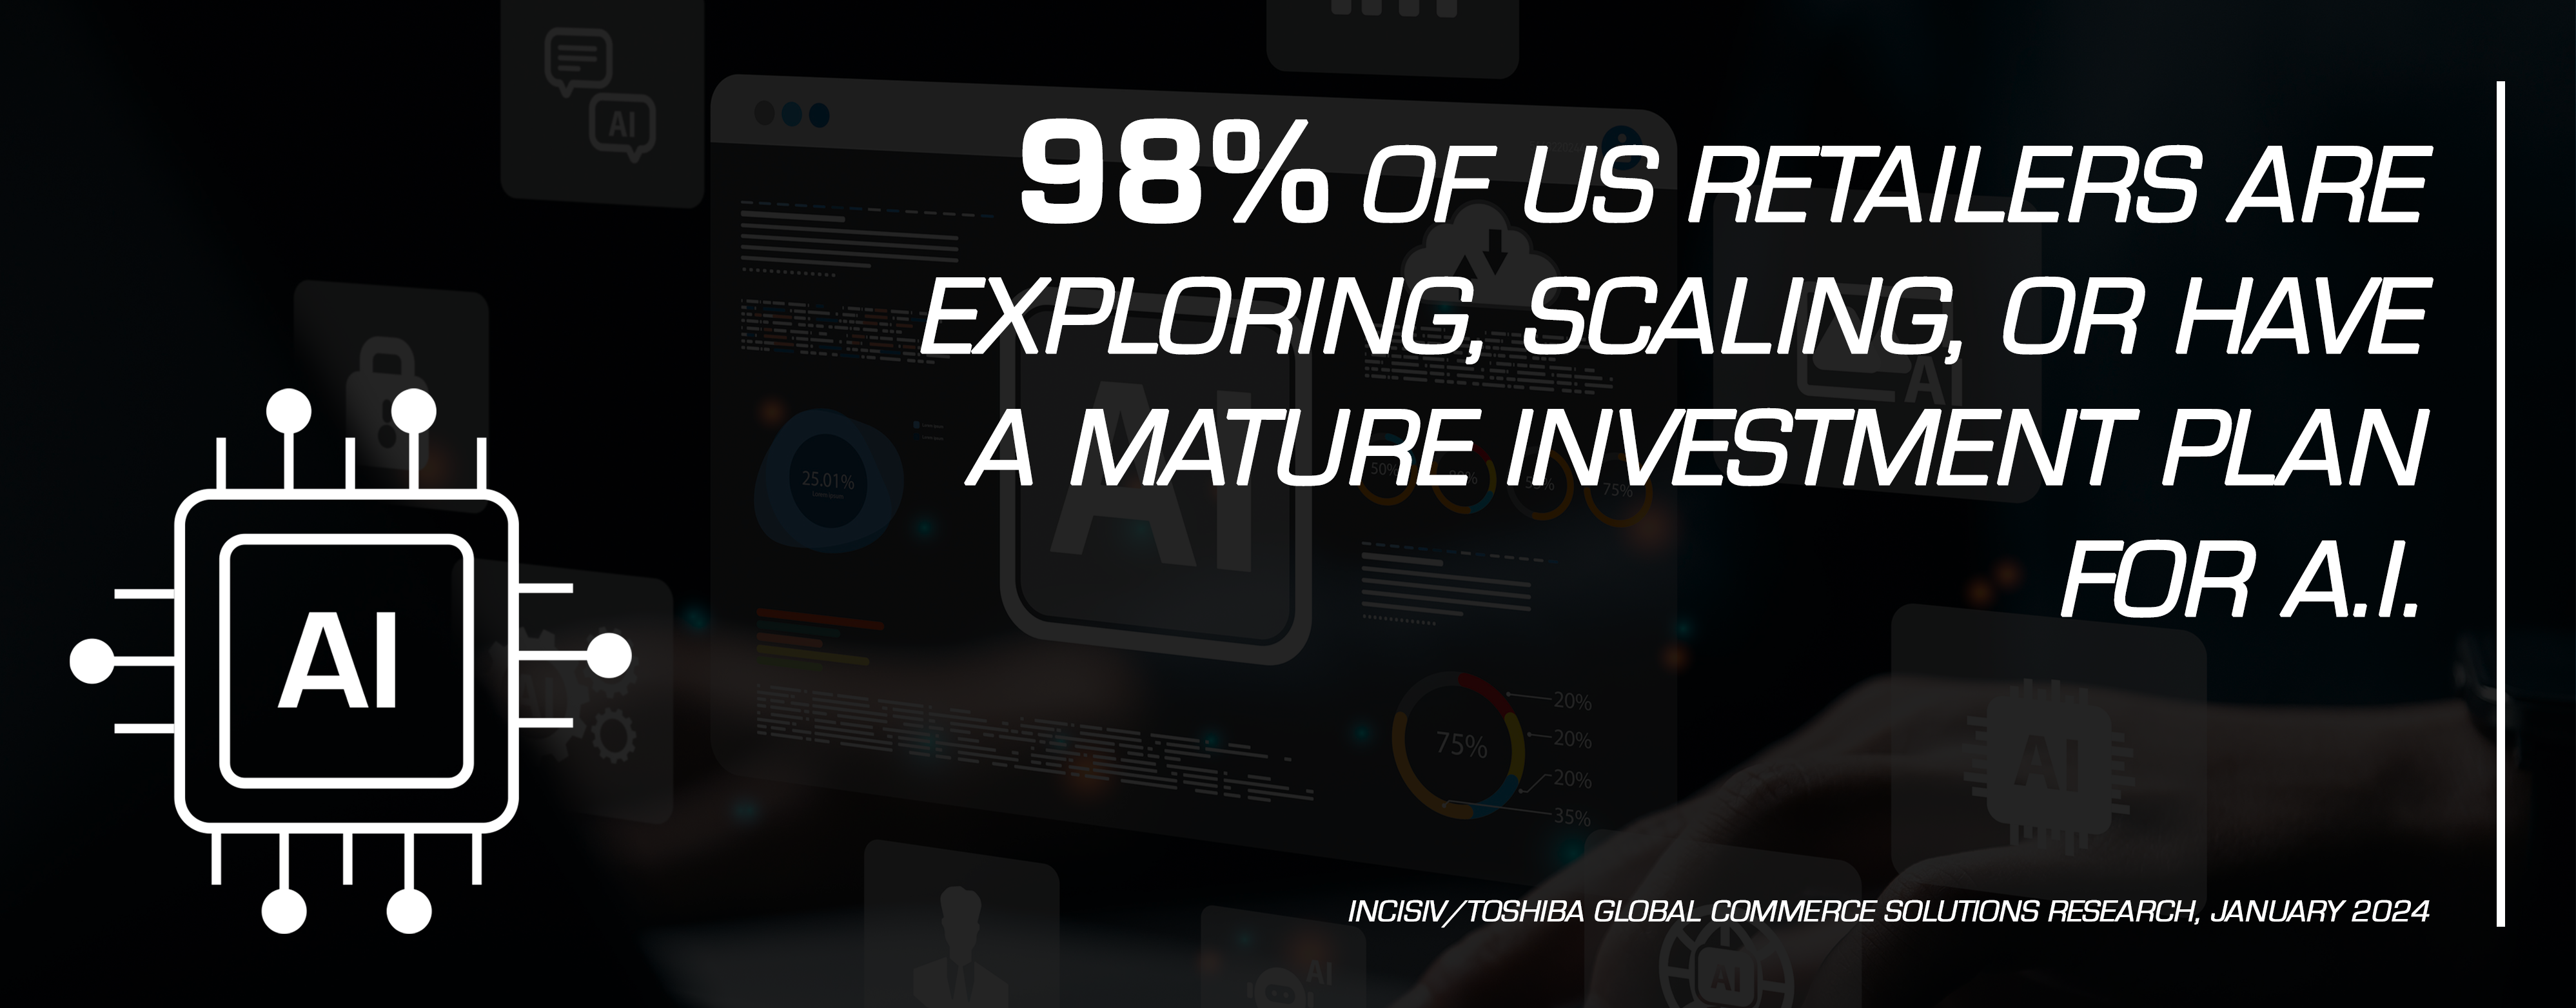 98% of US retailers are exploring, scaling, or have a mature investment plan for A.I.